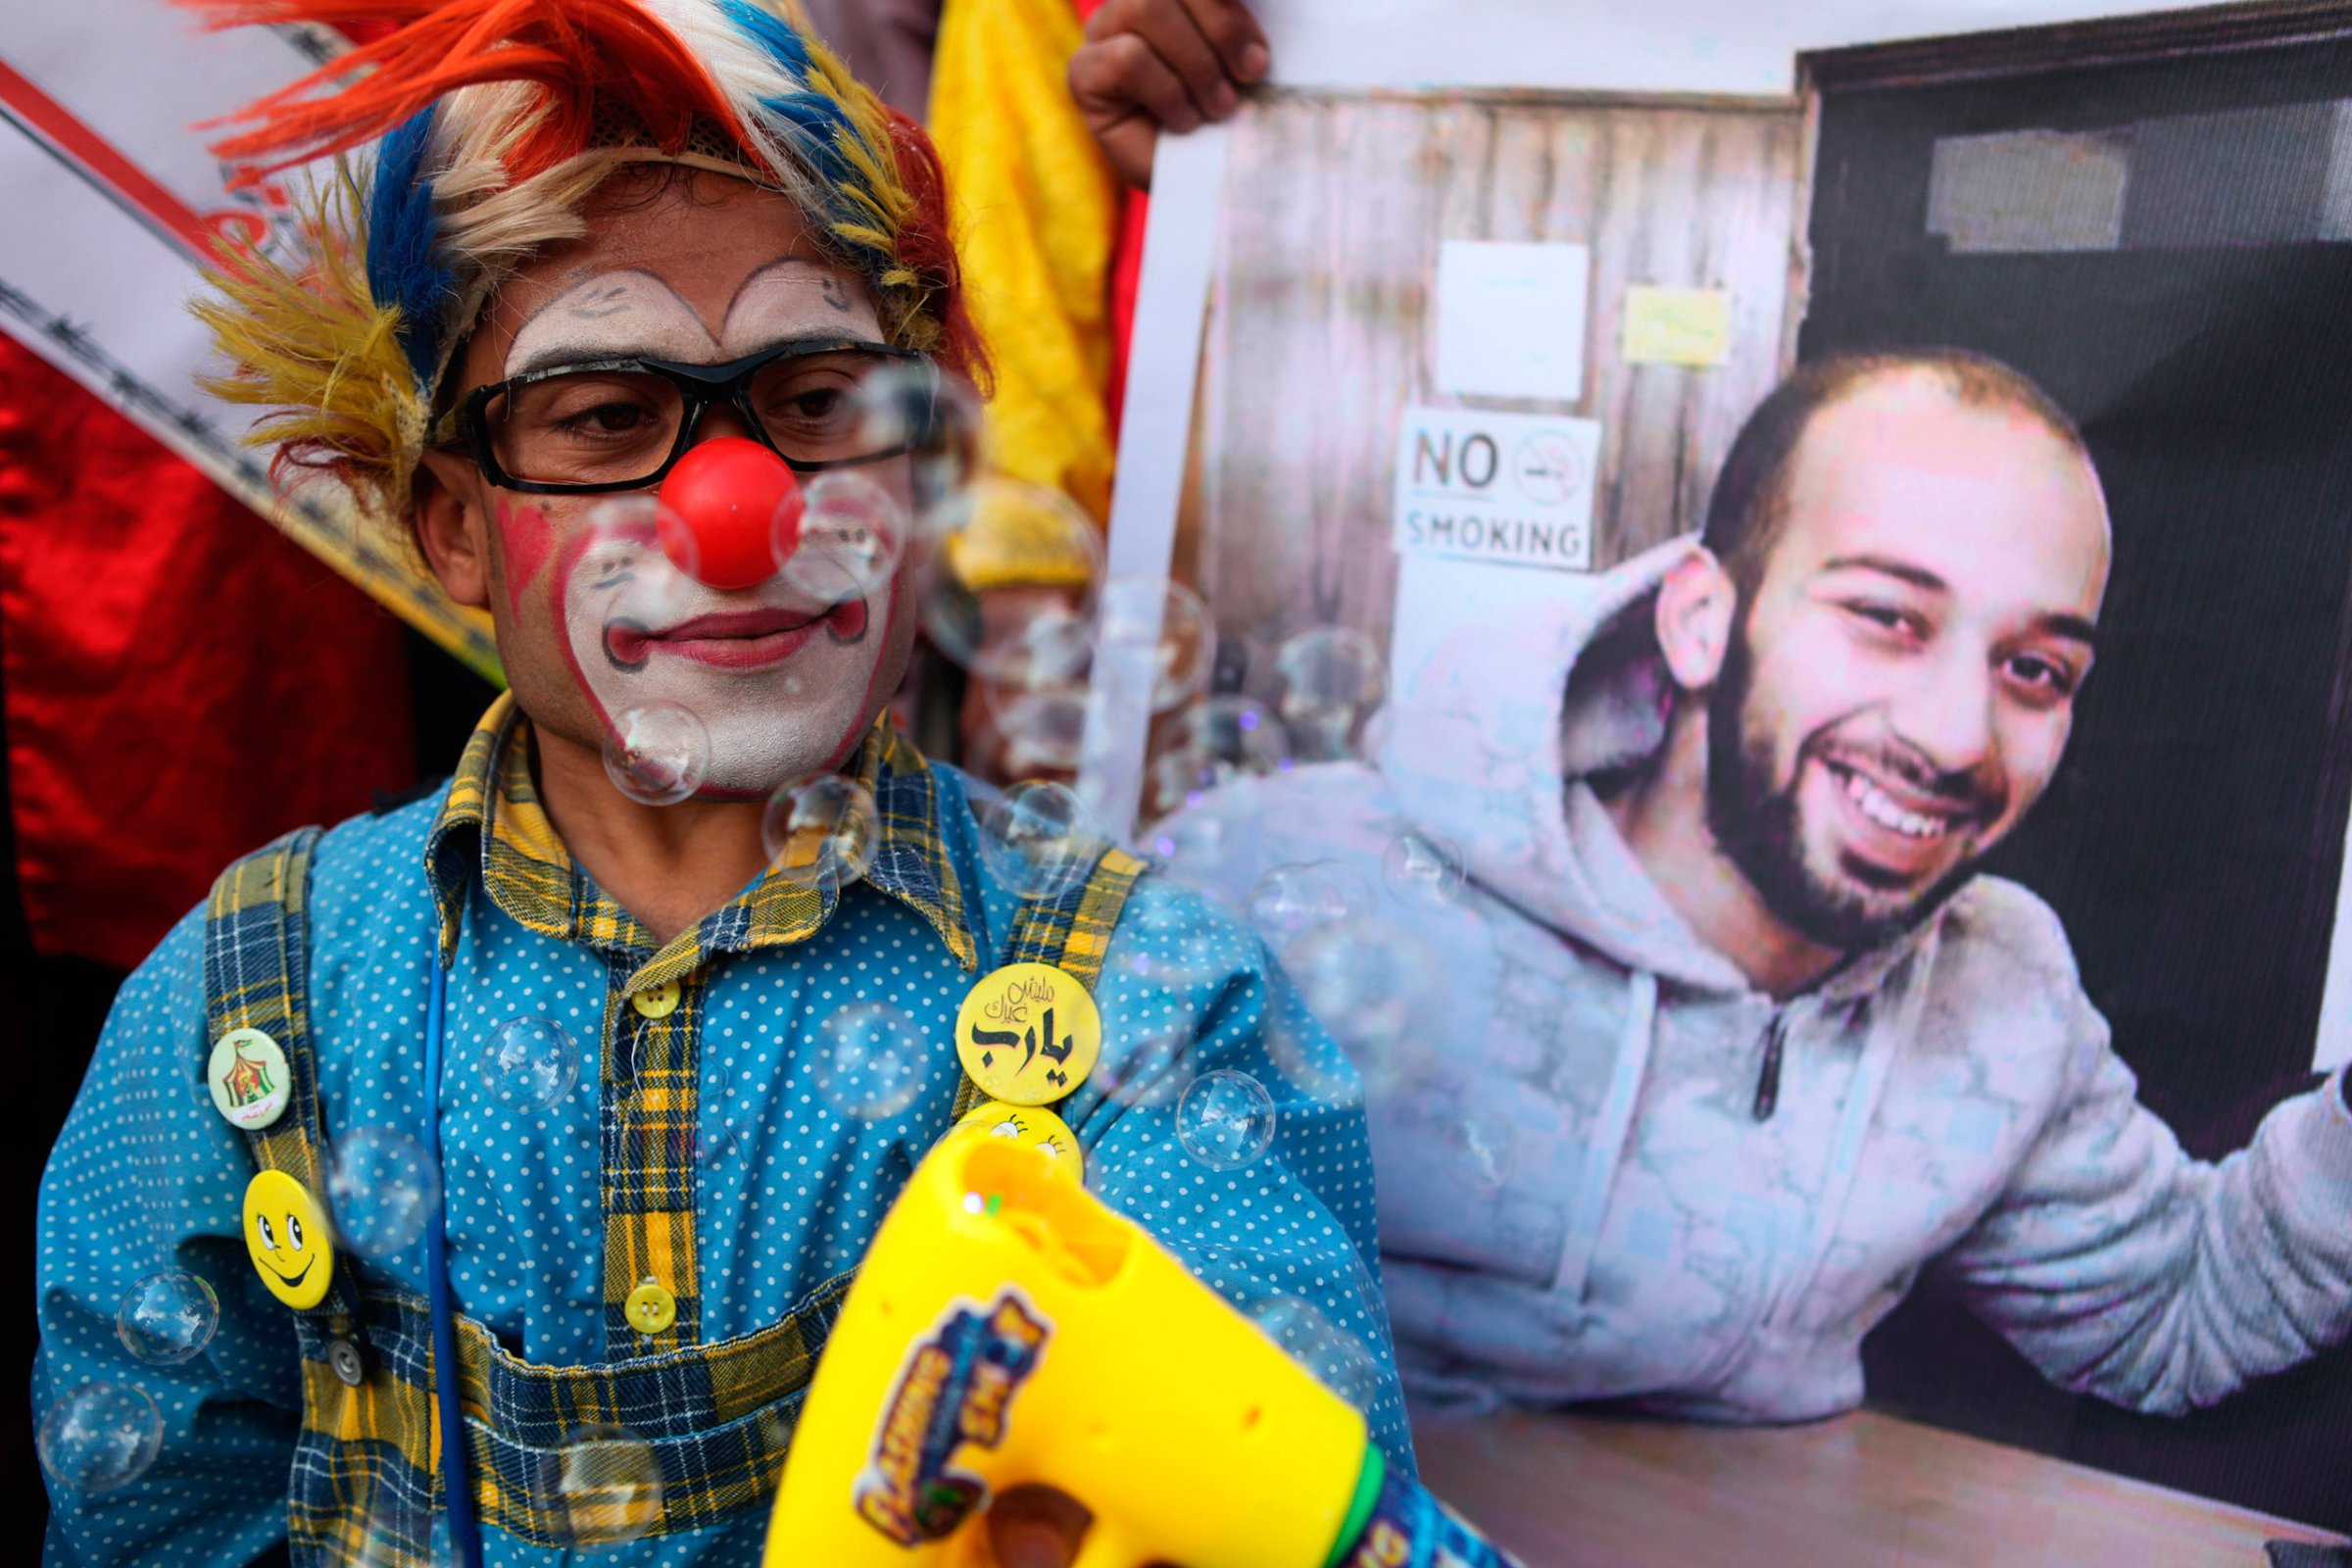 Palestinians clowns during a show of solidarity for their colleague, Mohammed Abu Sakha, who was jailed by Israel in December, in front of the Red Cross office in Gaza City, Feb. 8, 2016.